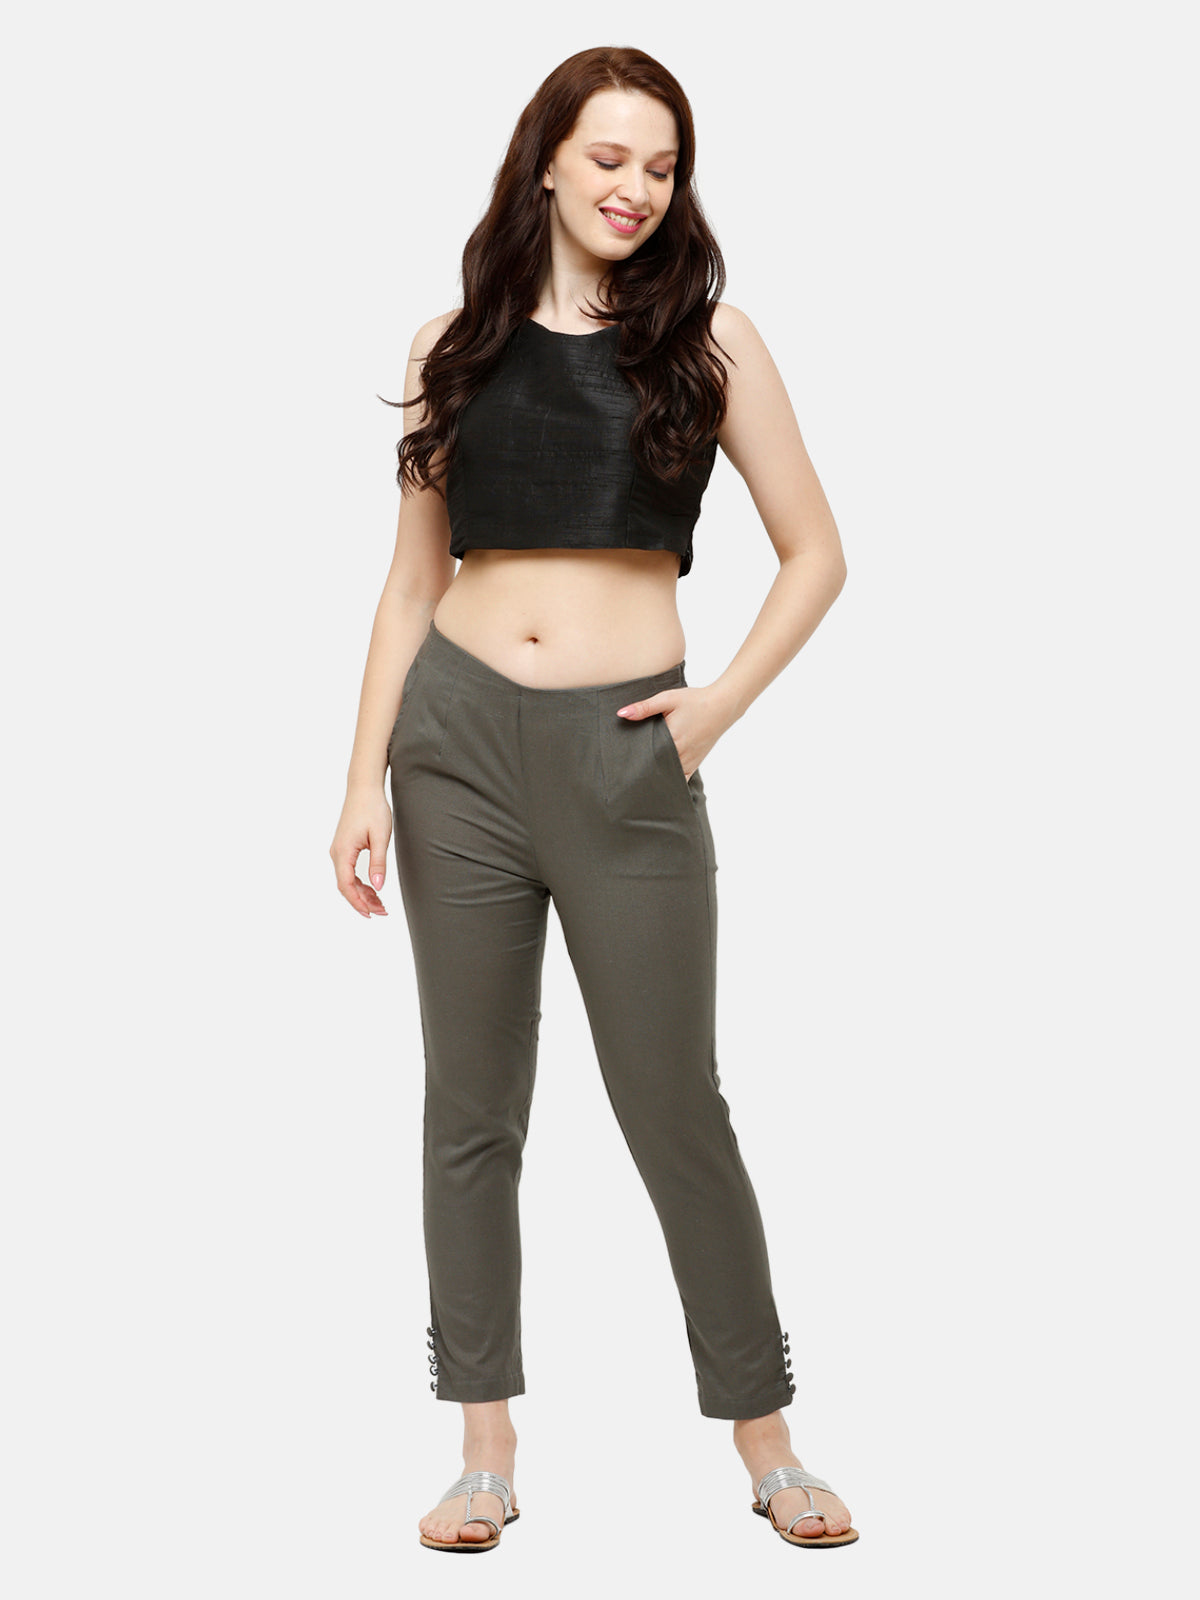 Buy NAARI Grey Cotton Slim Fit Embroidered Cigarette Trousers for Women's  at Amazon.in